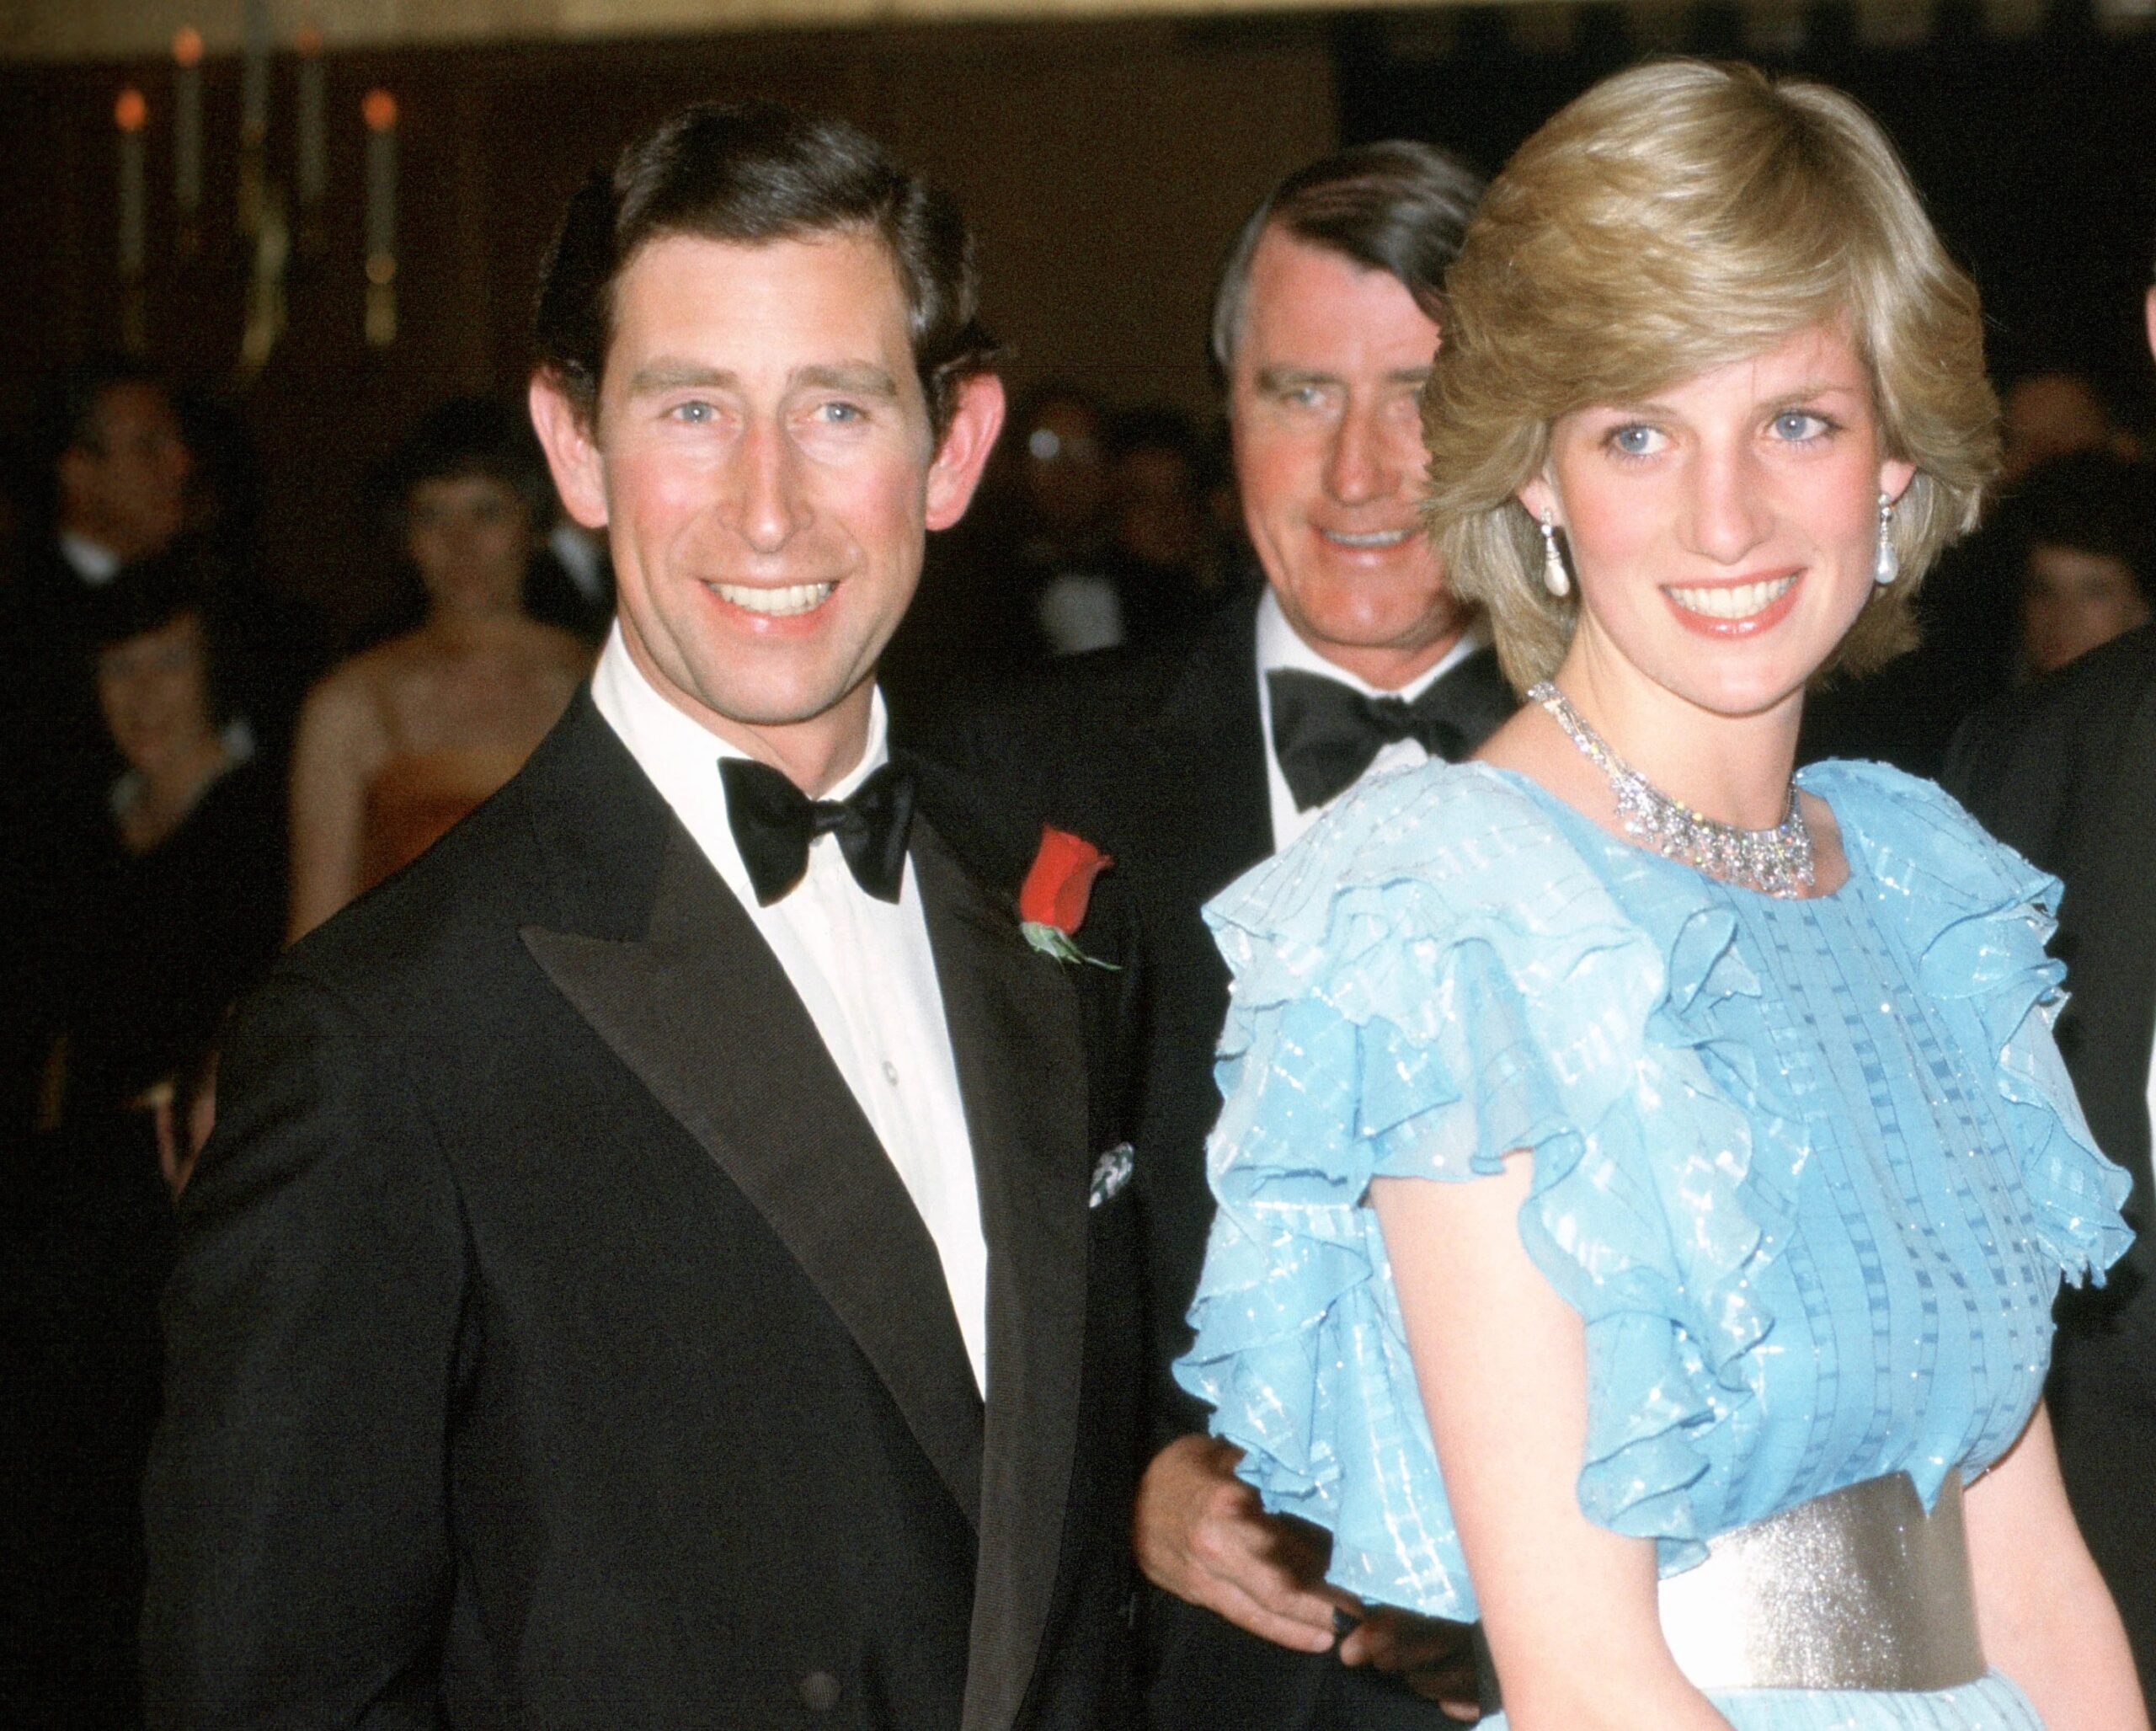 BBC makes eye-watering £1.42m donation to Princess Diana charities over Panorama scandal